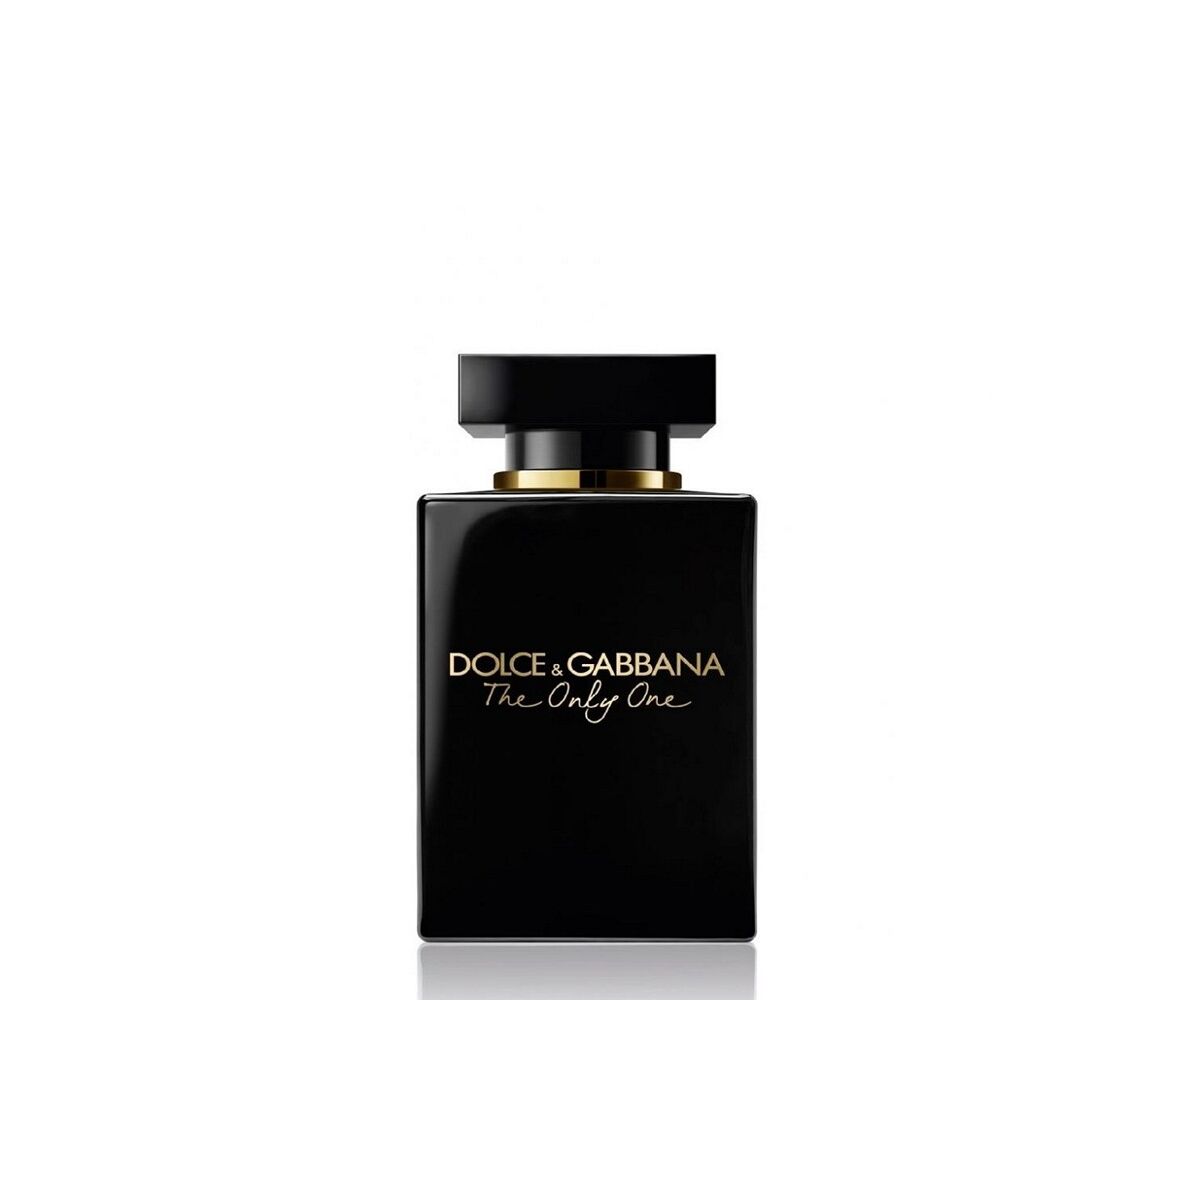 Dolce & Gabbana the only one, EDP., 100 ml. Dolce Gabbana the only one intense. Парфюм с нотами малины, ванили и ириса.. The only one intense dolce